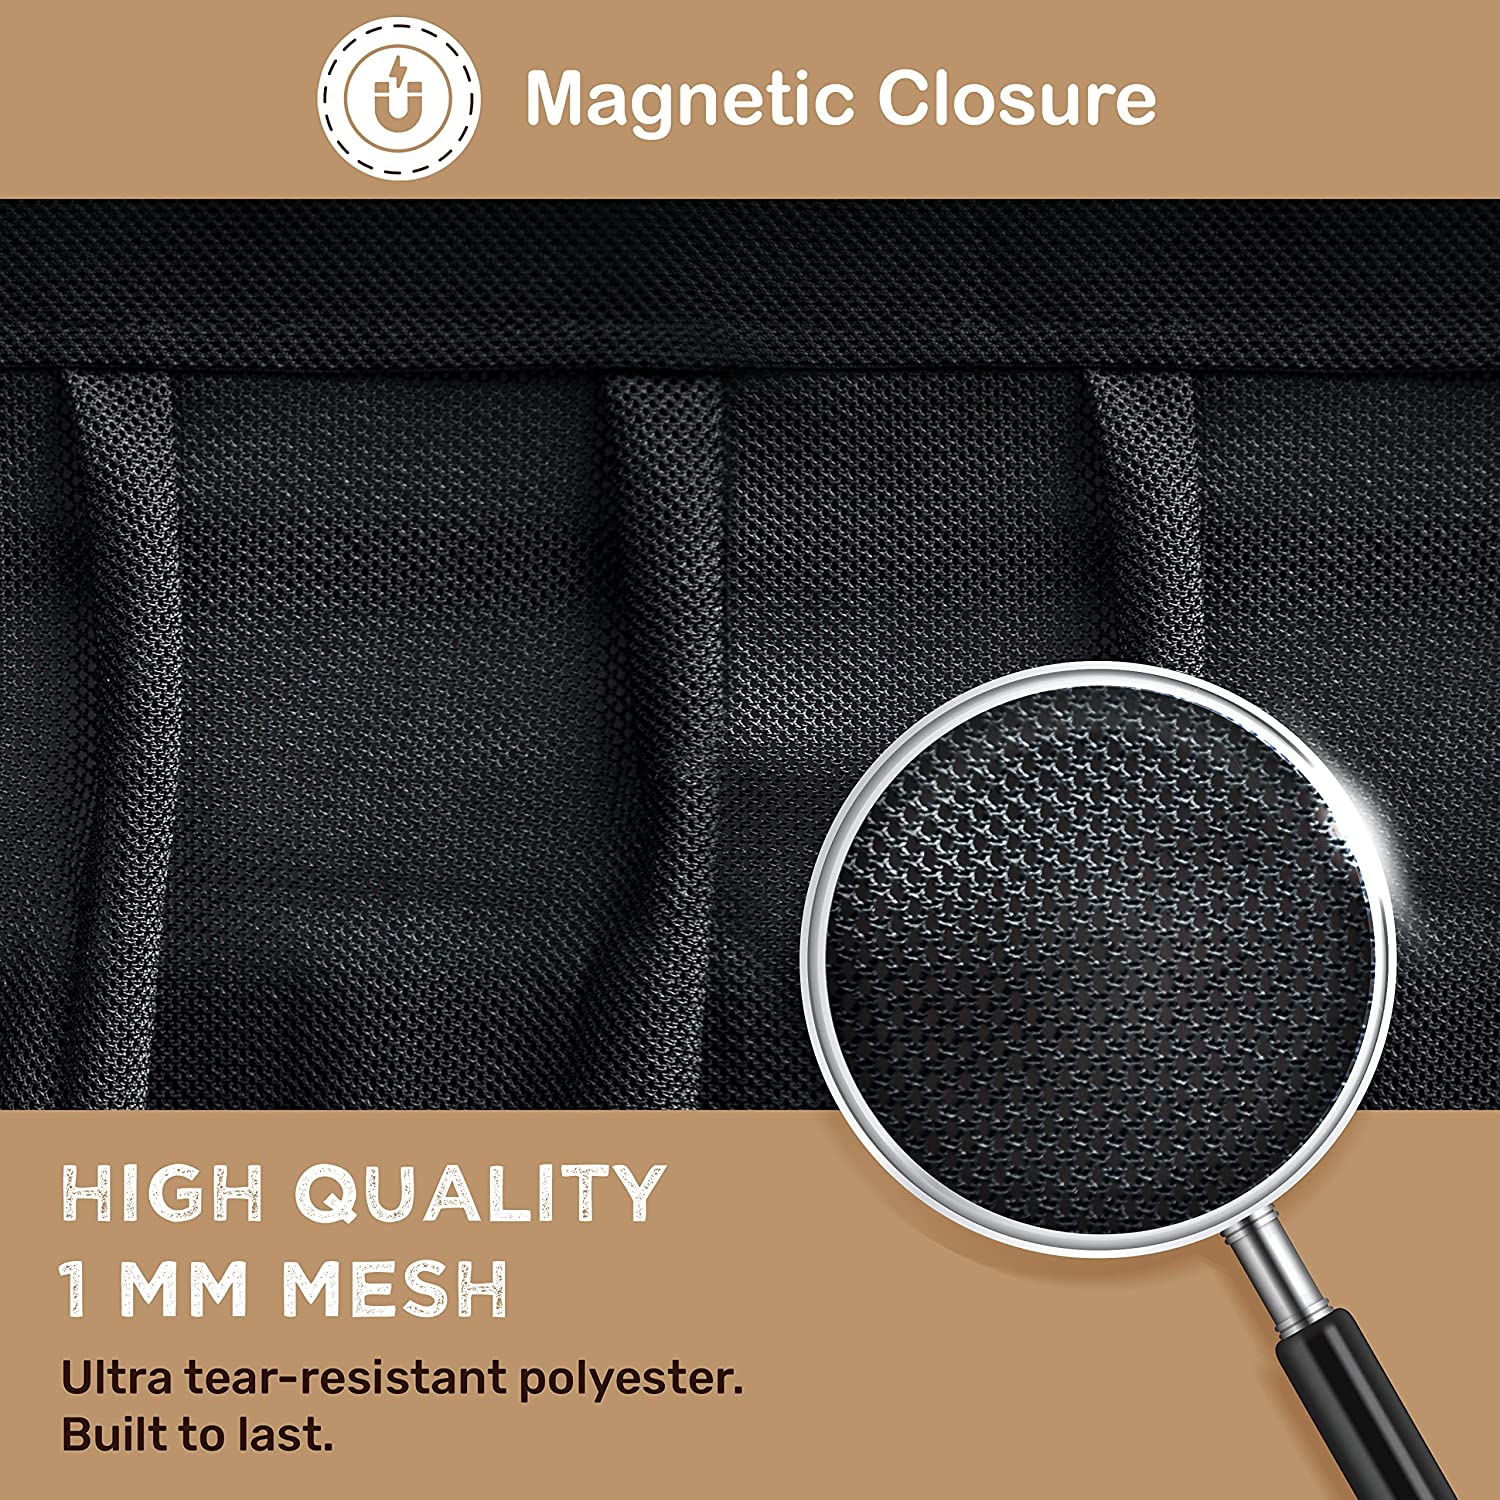 Magnetic Fly Screen 2 Products Bundle - Large Size